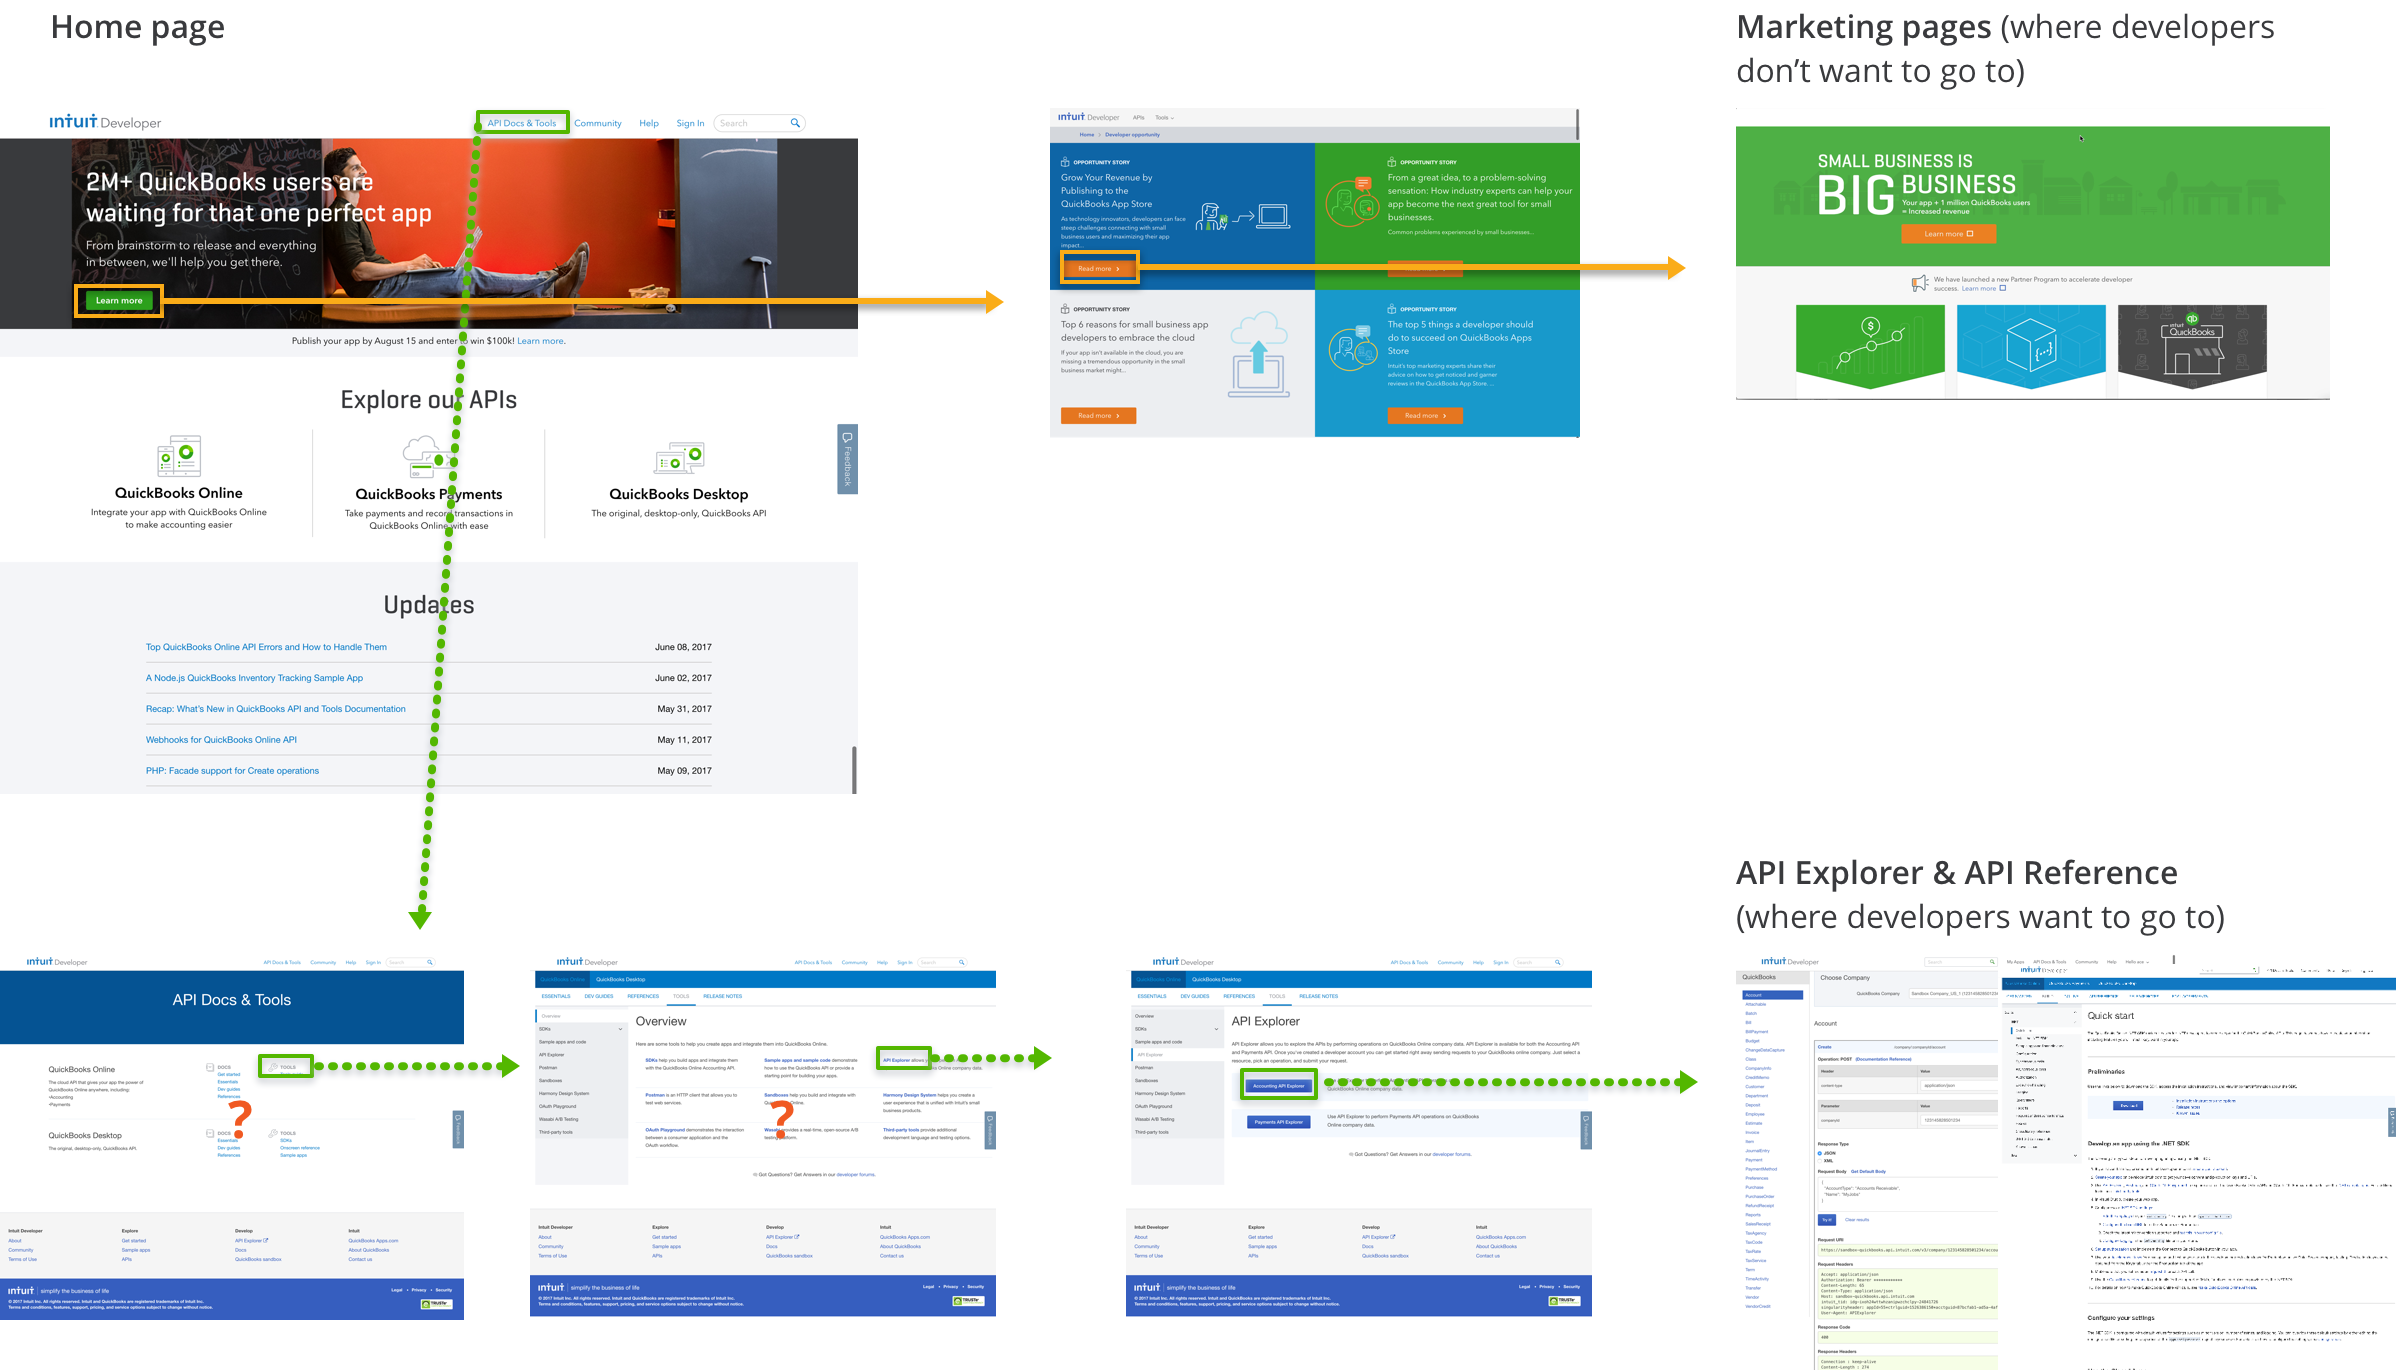 Screenshot flow from the home page to API explorer with 4 steps while the main CTA in the home page leads to marketing sites